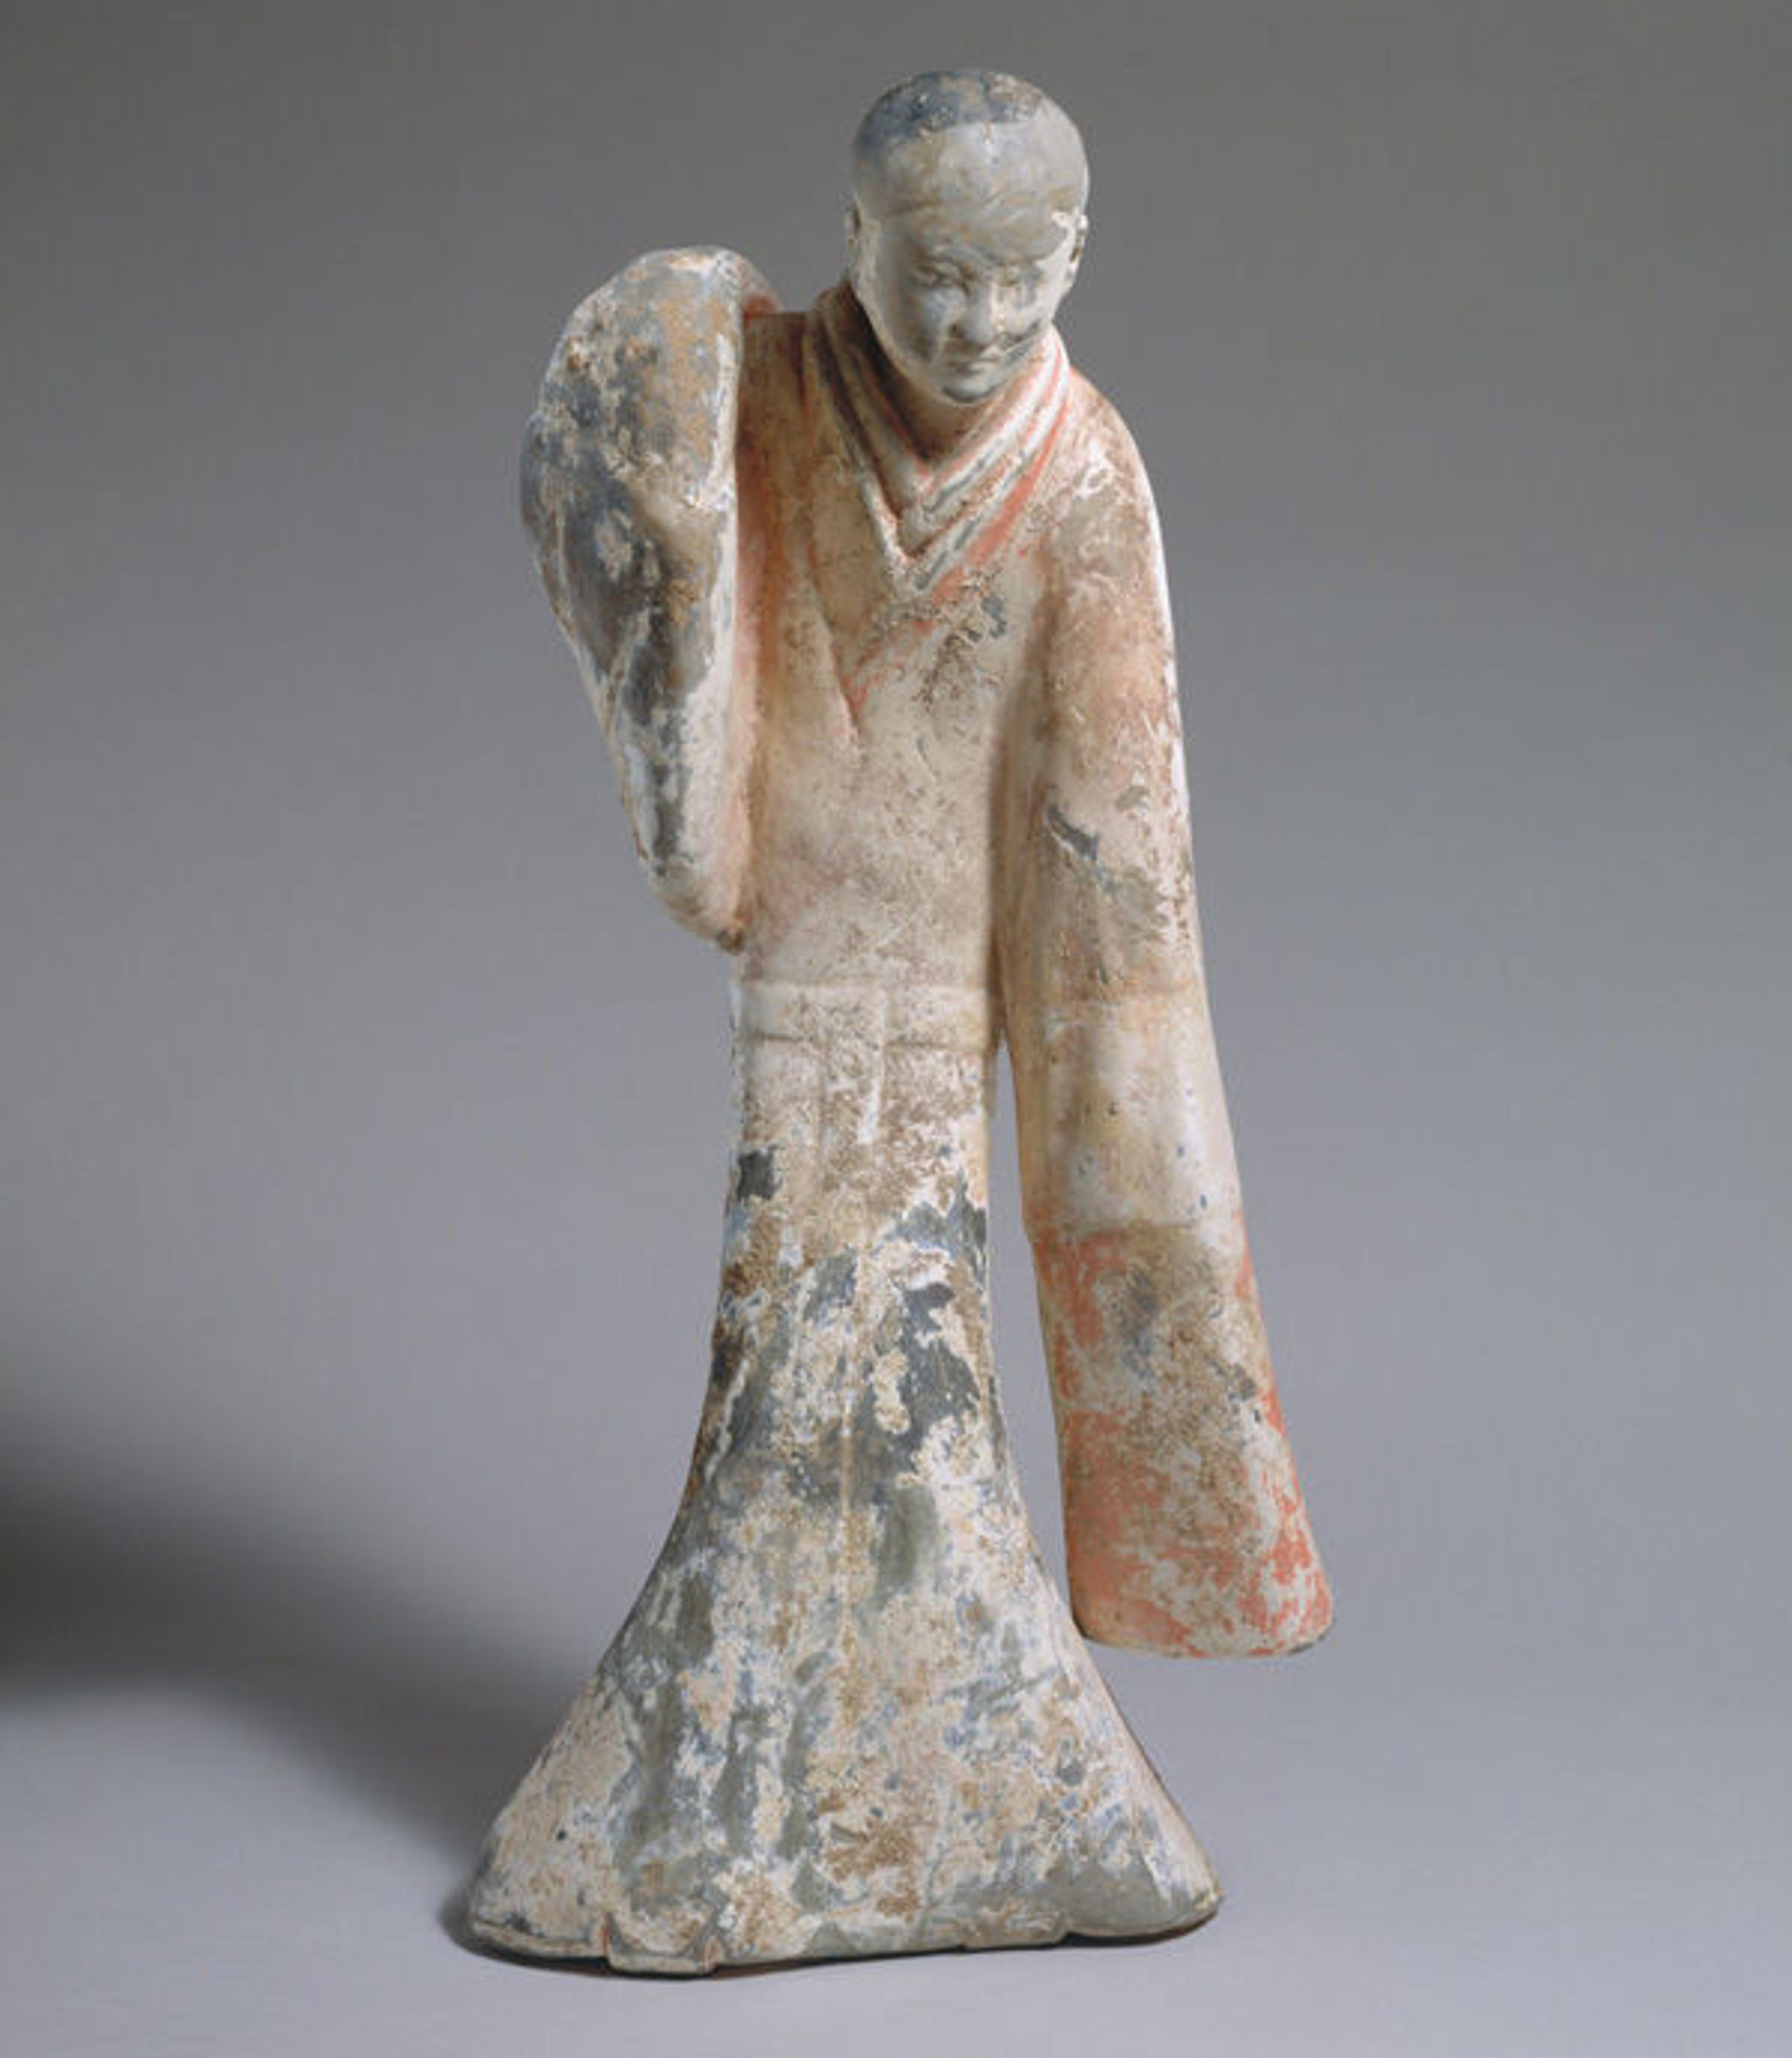 Female Dancer, 2nd century B.C. Western Han dynasty (206 B.C.–A.D. 9). China. Earthenware with pigment; h. 21 in. (53.3 cm); w. 9 3/4 in. (24.8 cm); d. 7 in. (17.8 cm). The Metropolitan Museum of Art, New York,  Charlotte C. and John C. Weber Collection, Gift of Charlotte C. and John C. Weber, 1992 (1992.165.19)